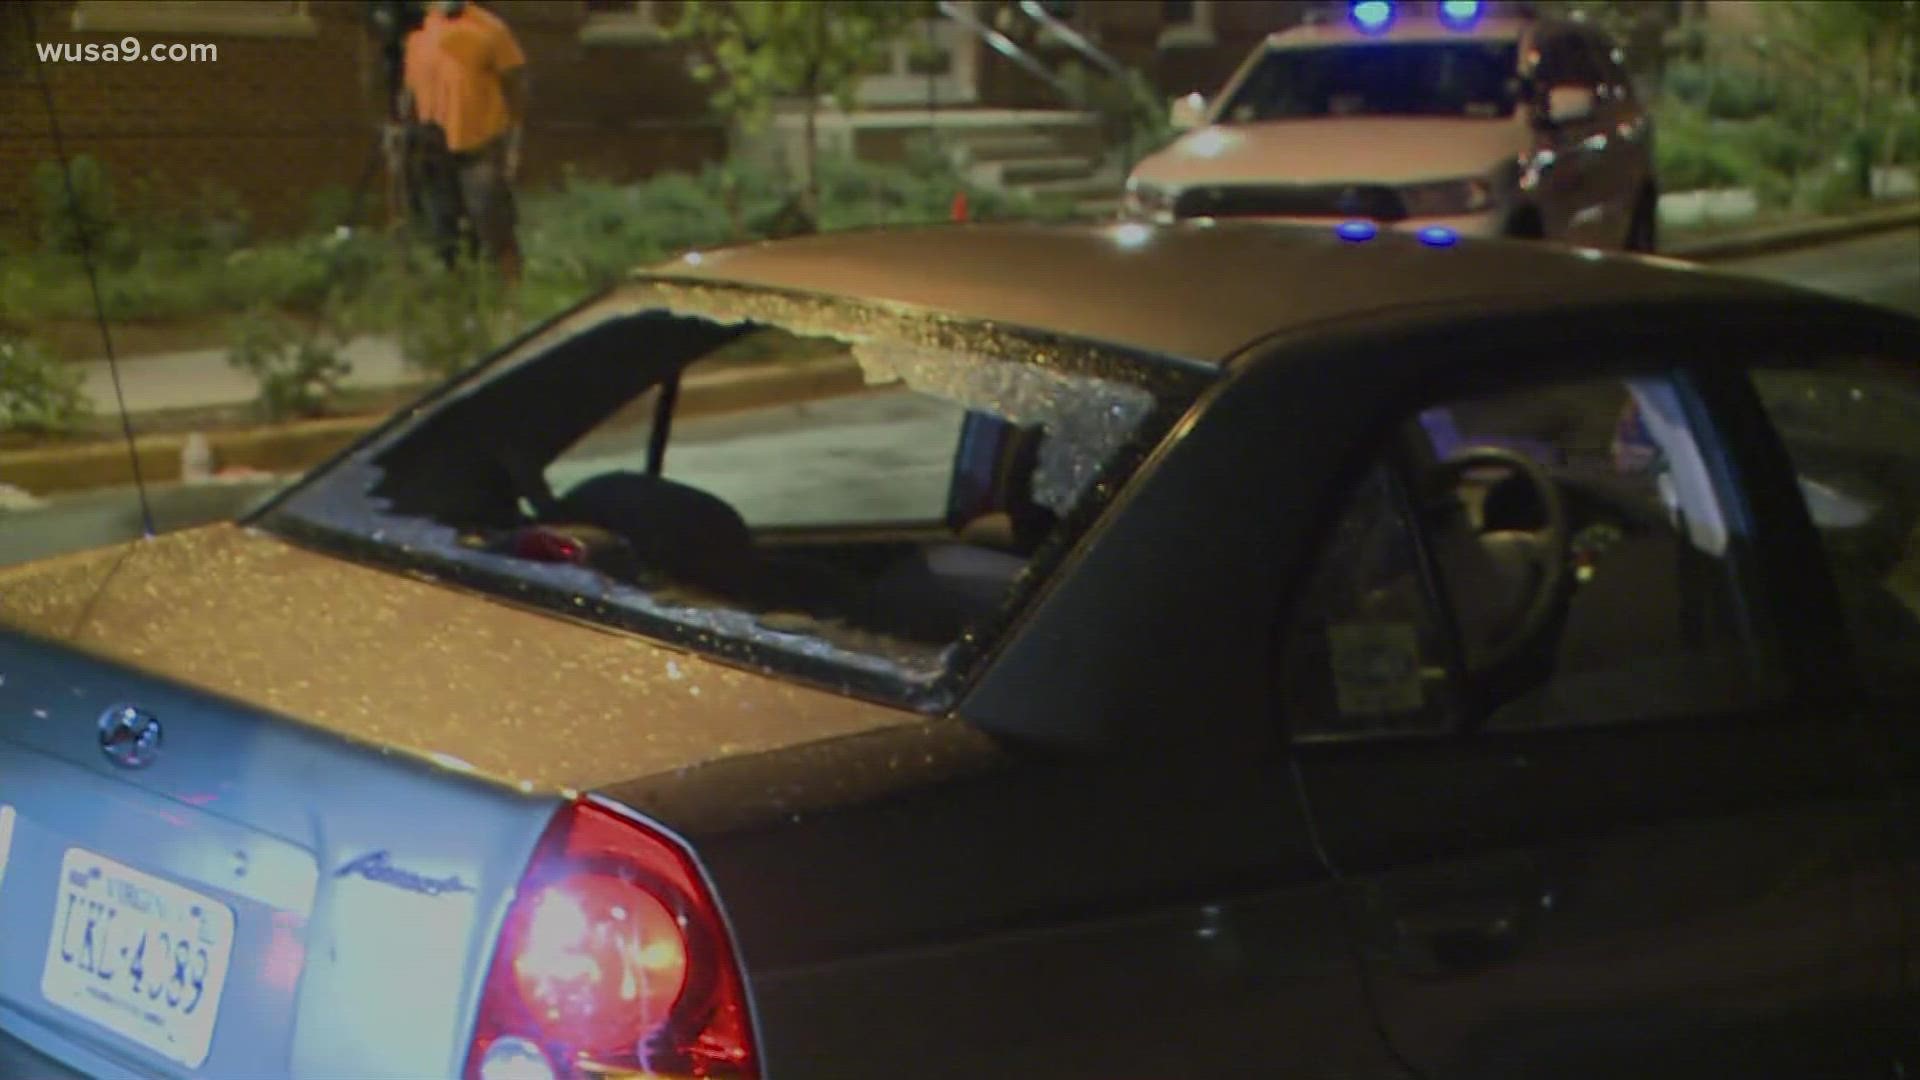 Police are investigating after three people, including a woman and child, were shot in Southeast D.C. Tuesday evening.